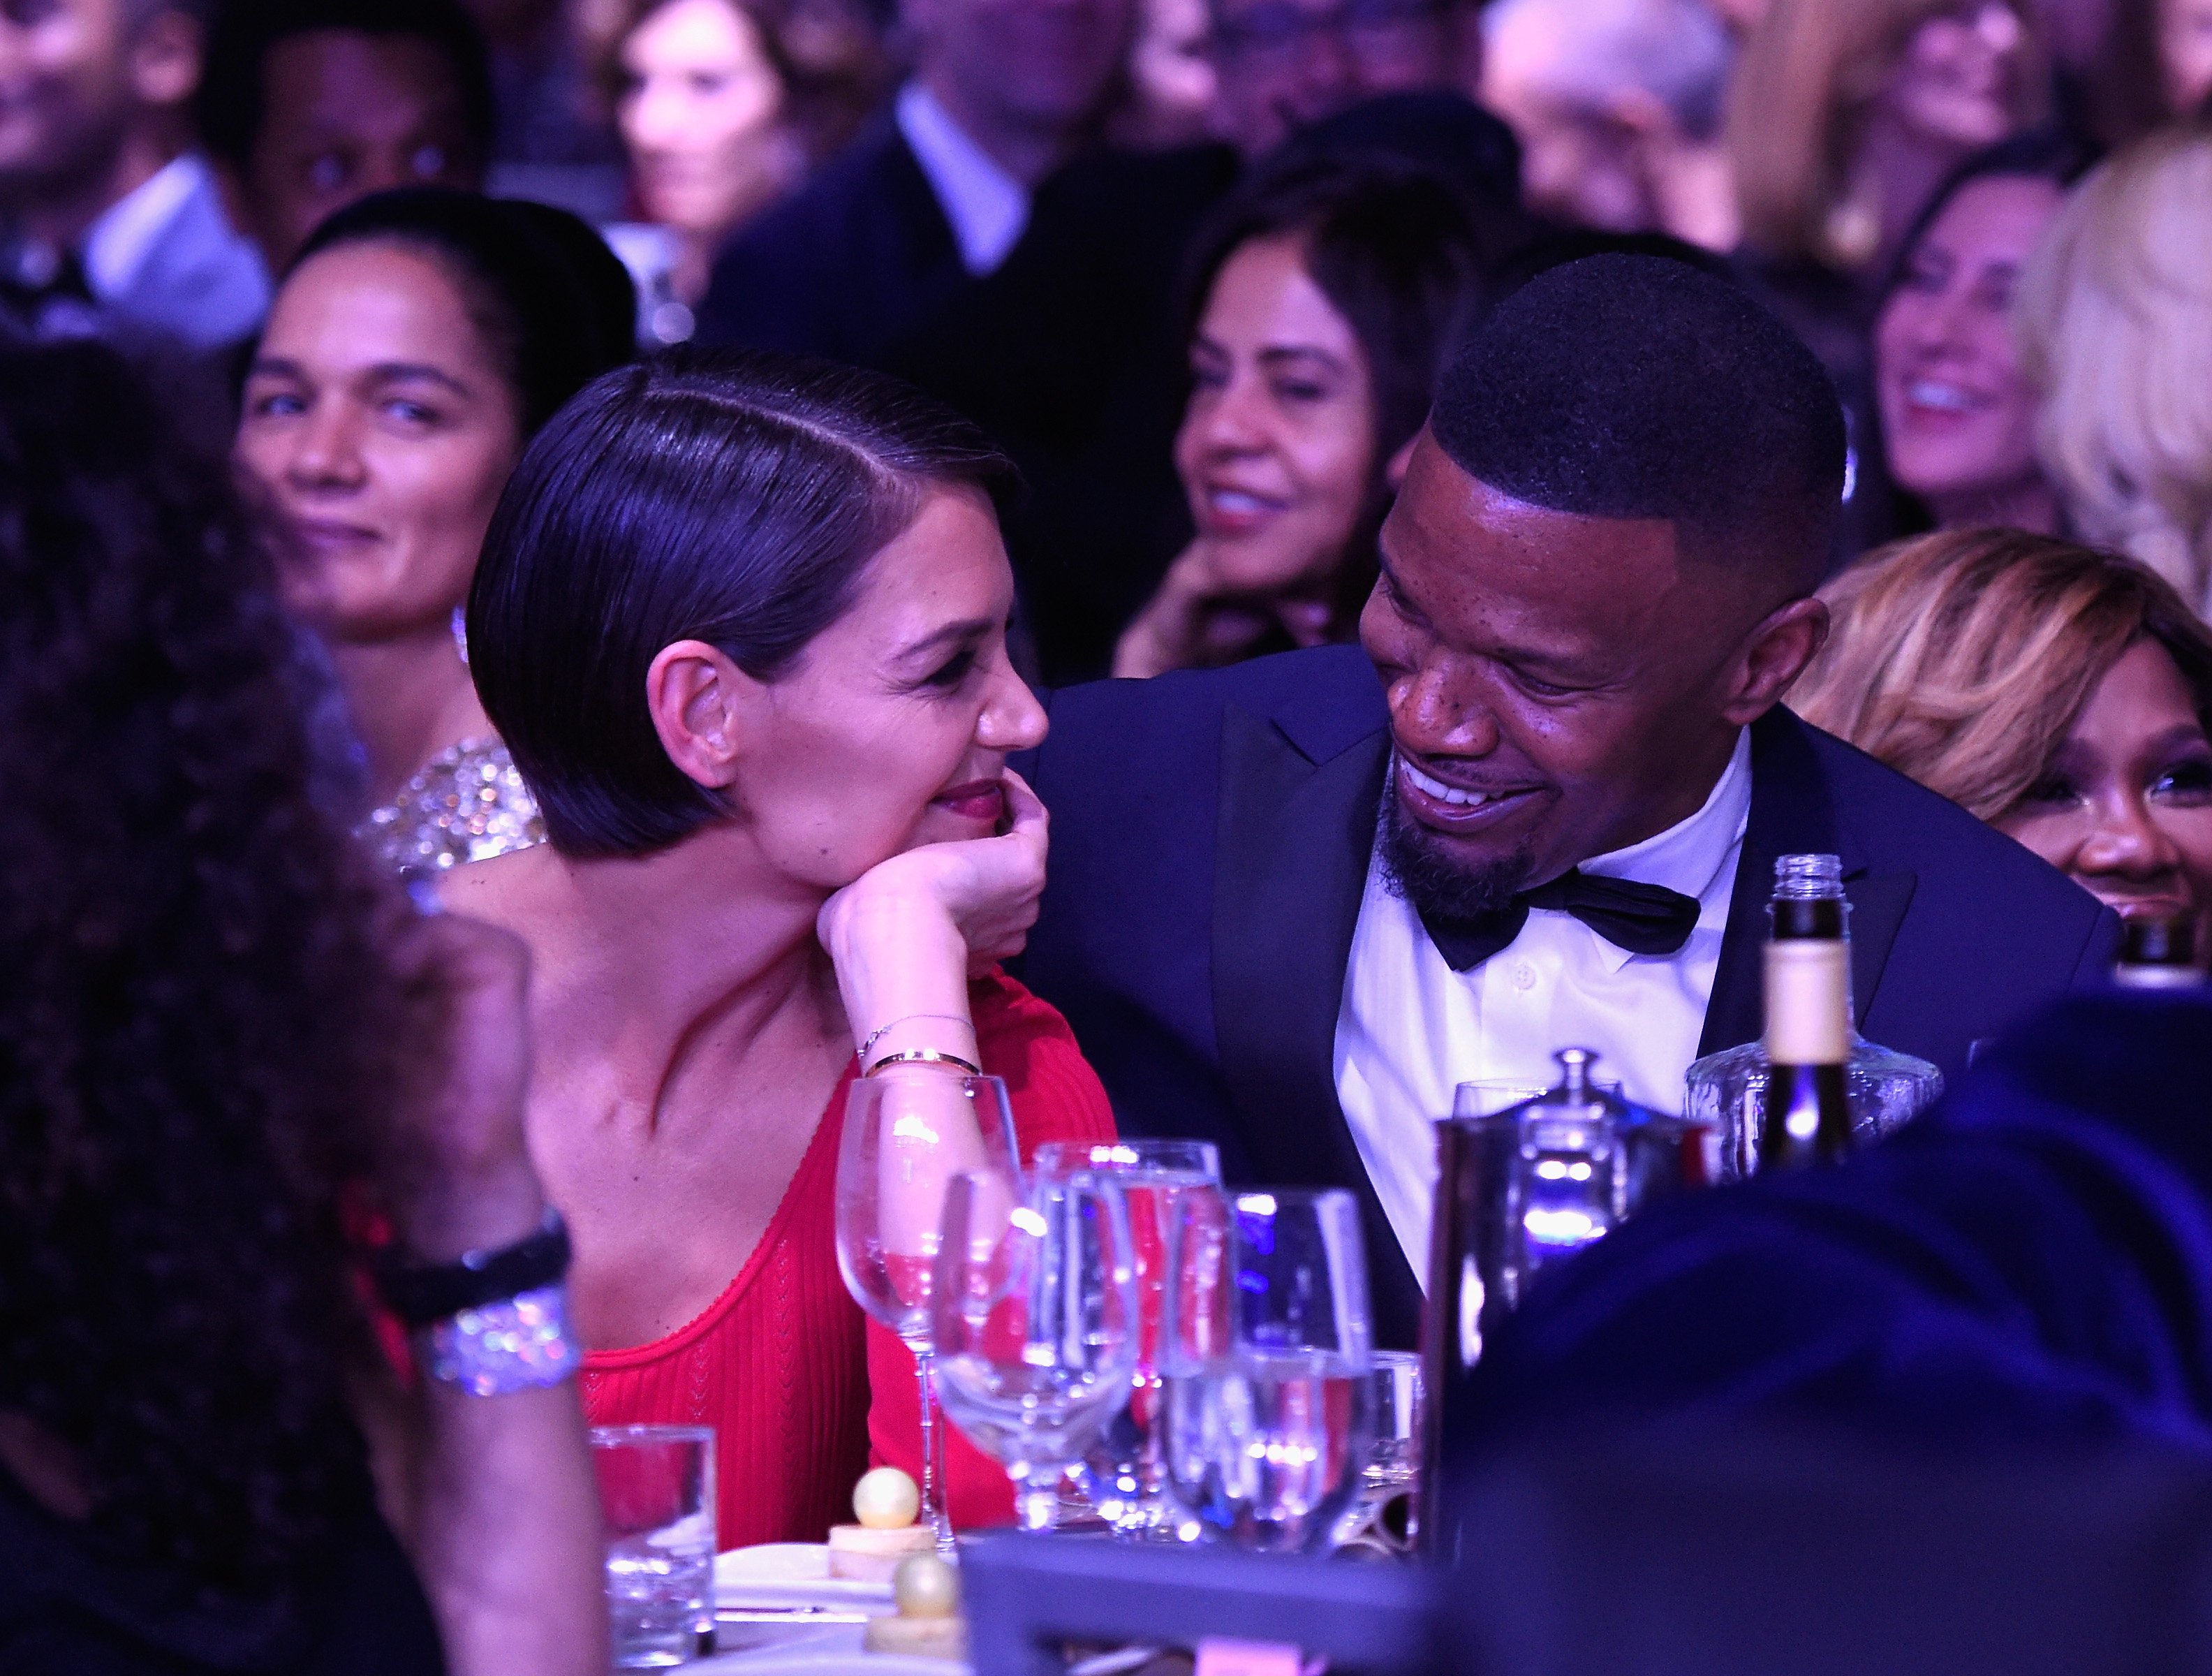 Actress Katie Holmes and actor Jamie Foxx attend the Clive Davis and Recording Academy Pre-Grammy Gala on January 27, 2018 in New York City. | Source: Getty Images